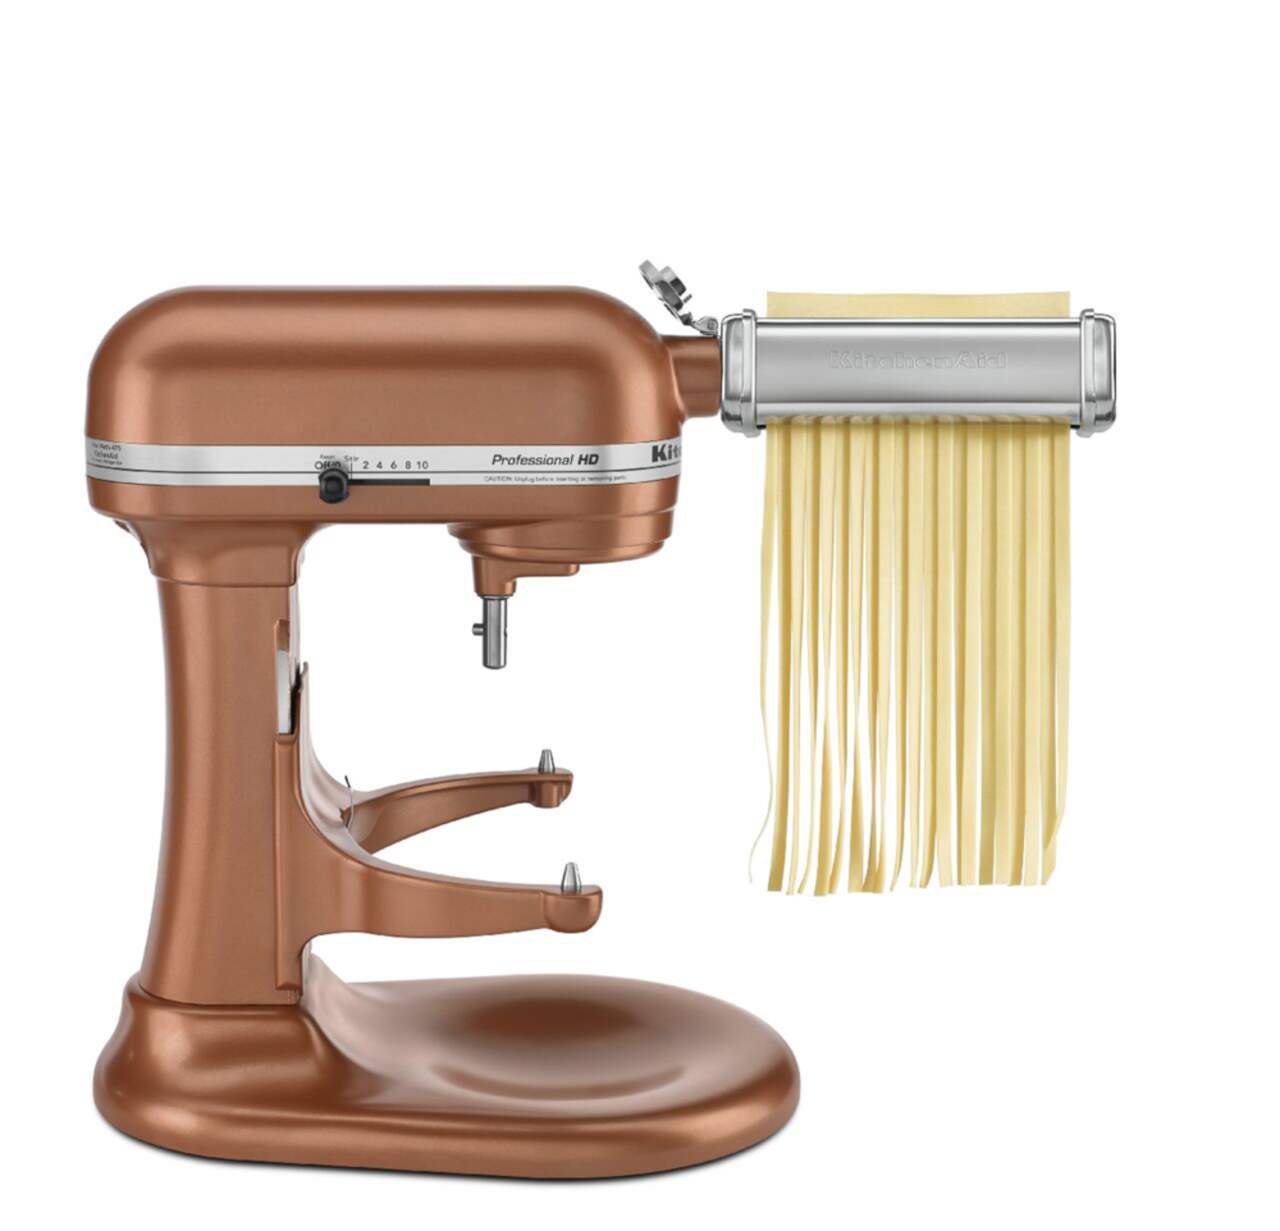 https://media-www.canadiantire.ca/product/living/kitchen/kitchen-appliances/0432203/kitchen-aid-pasta-roller-9751819d-e24b-4772-821d-2dcd21dd7264.png?imdensity=1&imwidth=1244&impolicy=mZoom